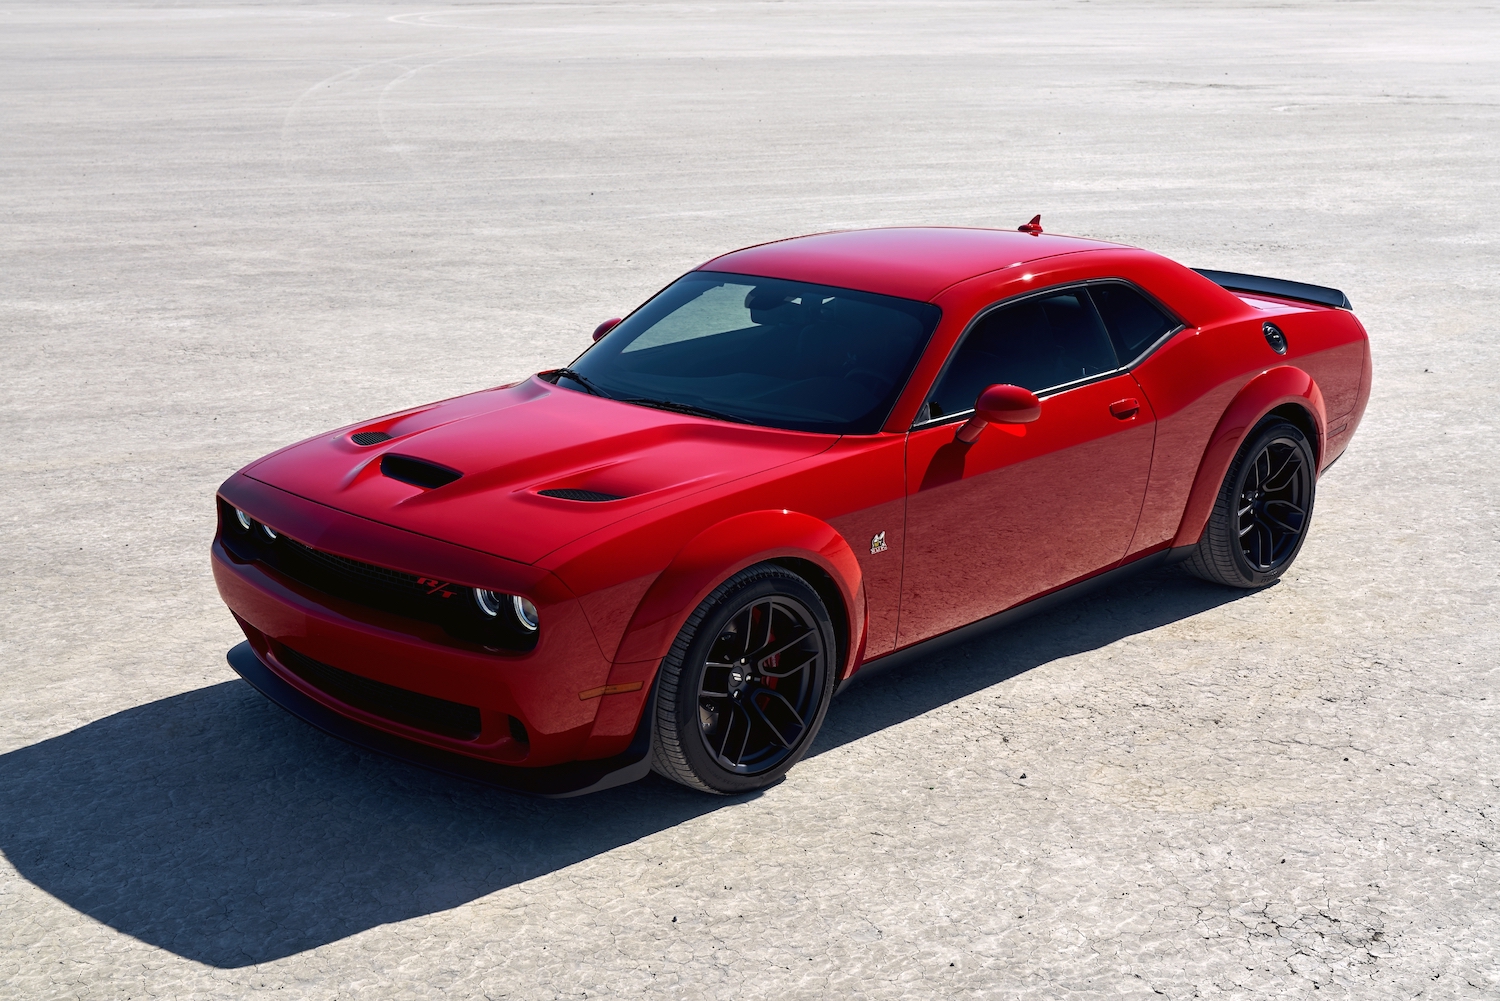 Promo photo of a red 2021 Challenger Scat Pack widebody edition